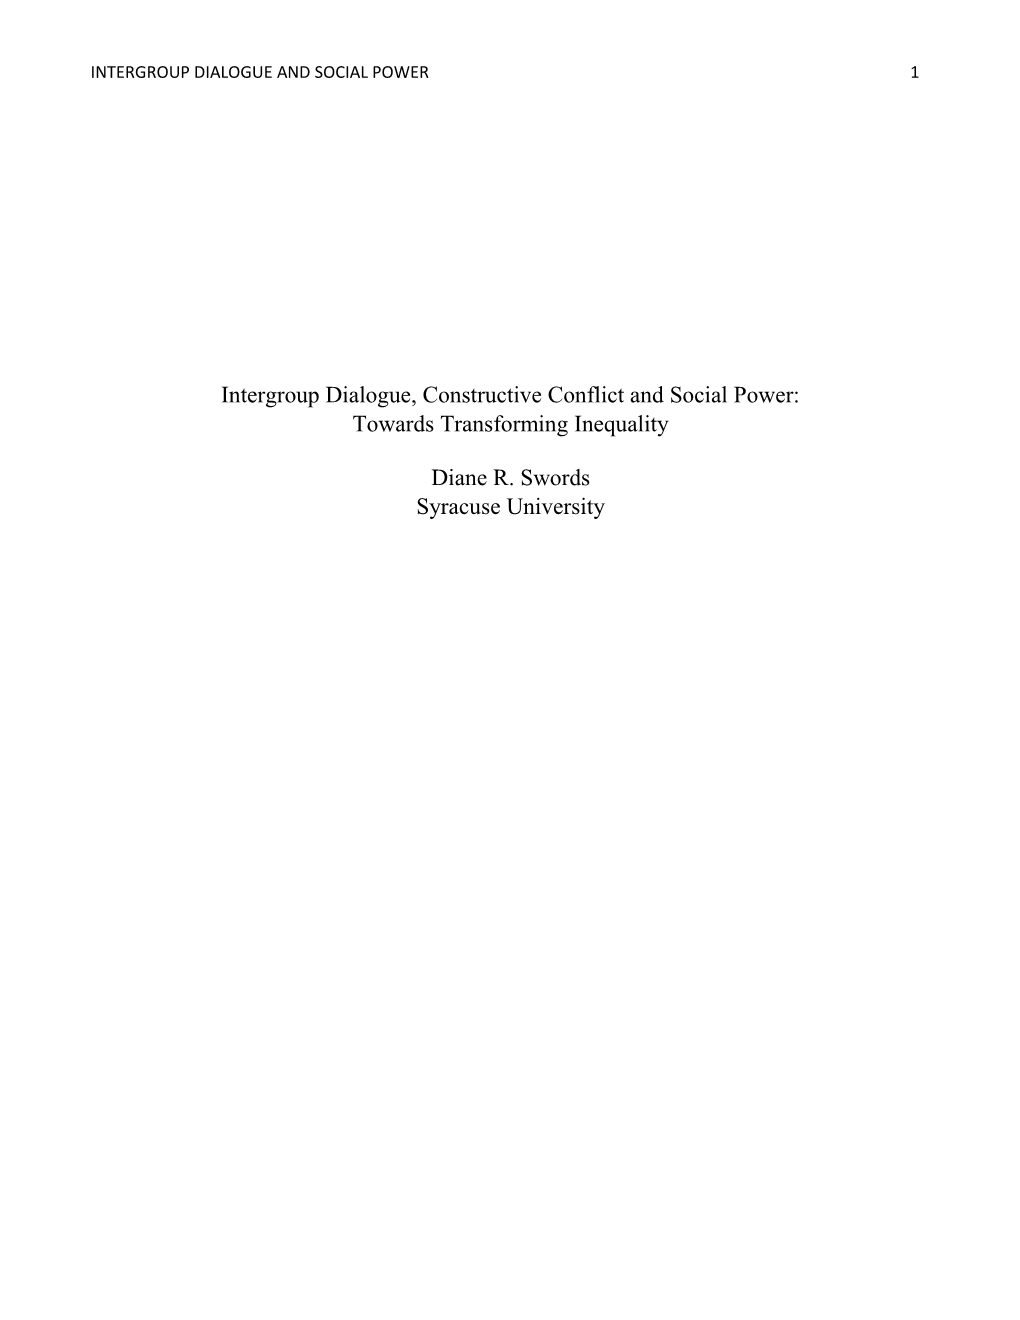 Intergroup Dialogue, Constructive Conflict and Social Power: Towards Transforming Inequality